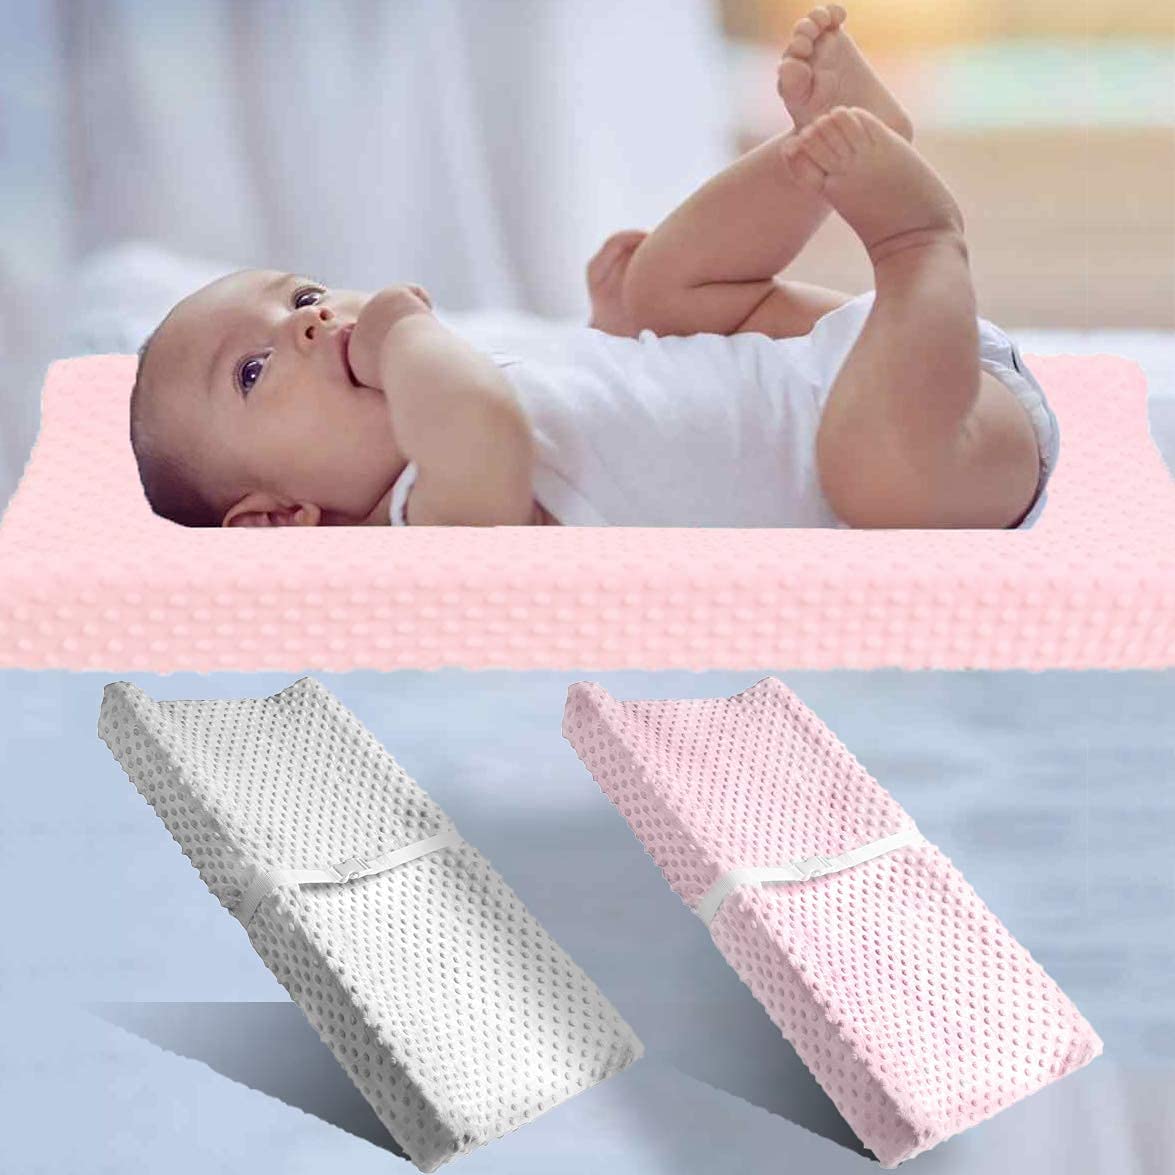 Vextronic Changing Pad Cover Ultra Soft Minky Dots Plush Changing Table Covers Breathable Changing Table Sheets Wipeable Diaper Changing Pad Cover for Baby Boys Girls (2 Pack)